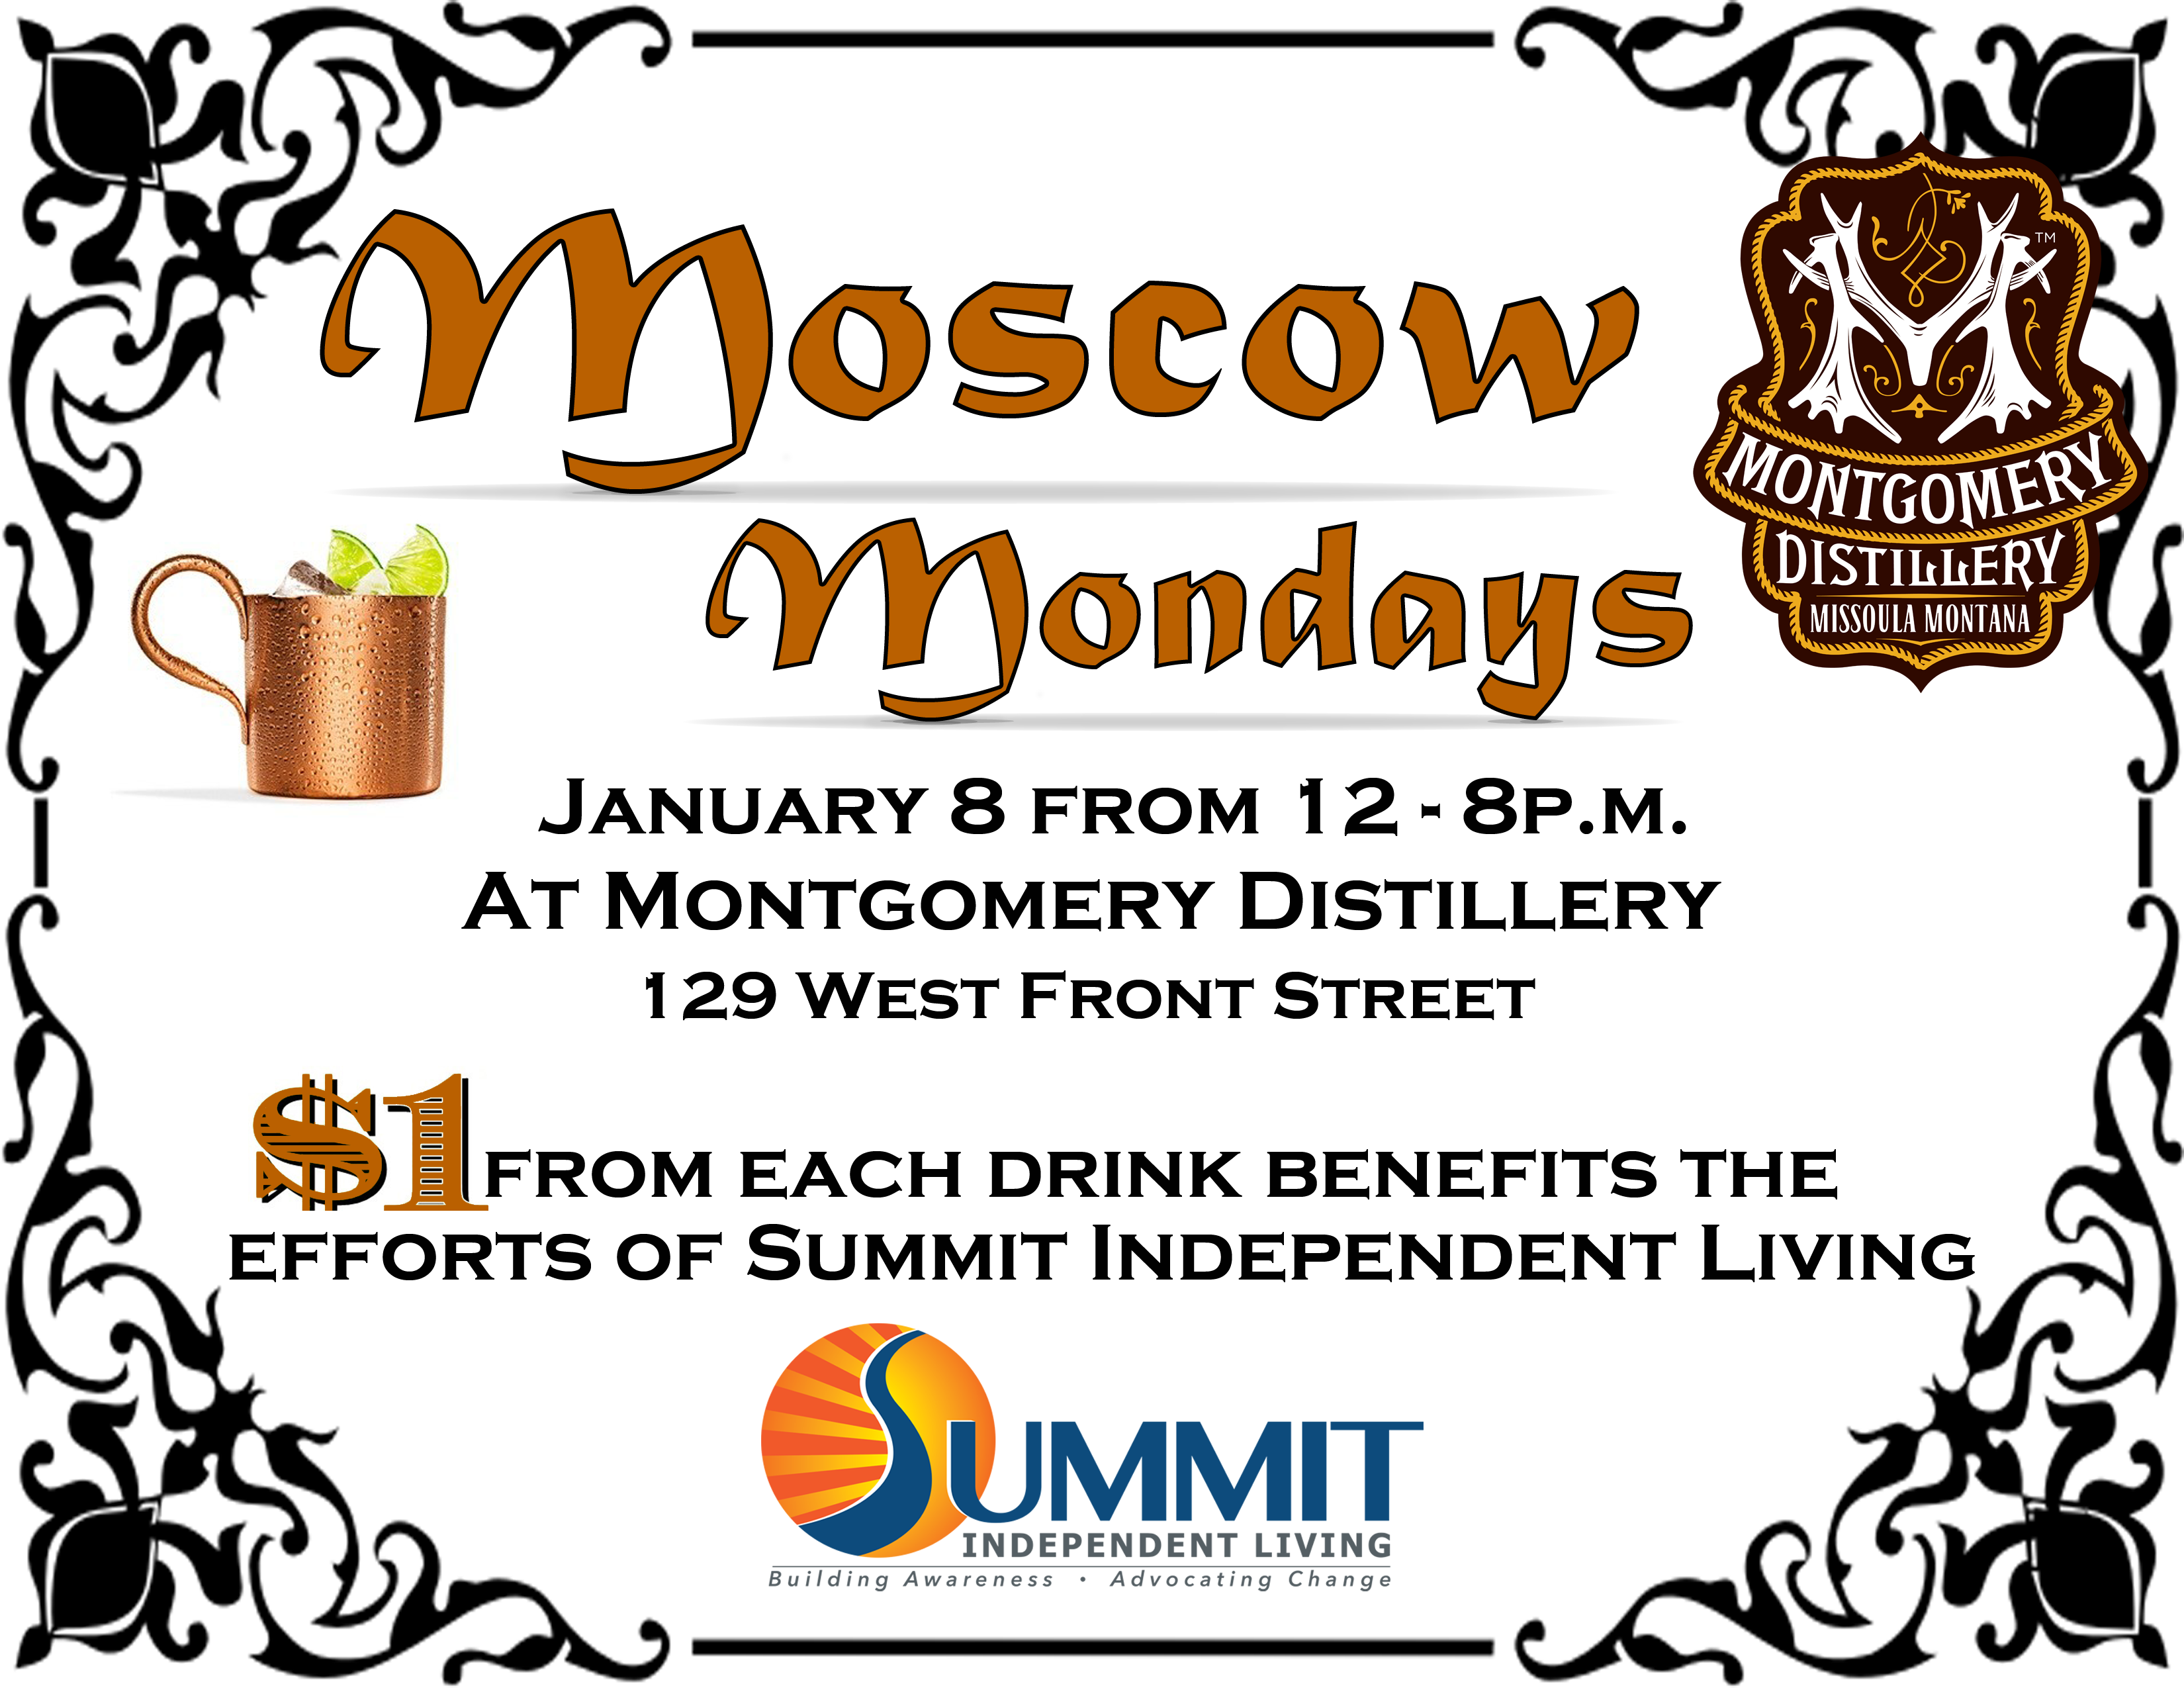 Moscow Mondays, January 8 from 12 PM-8 PM, that Montana distillery 129 West Front St., $1 from each drink benefits the efforts of Summit Independent living.